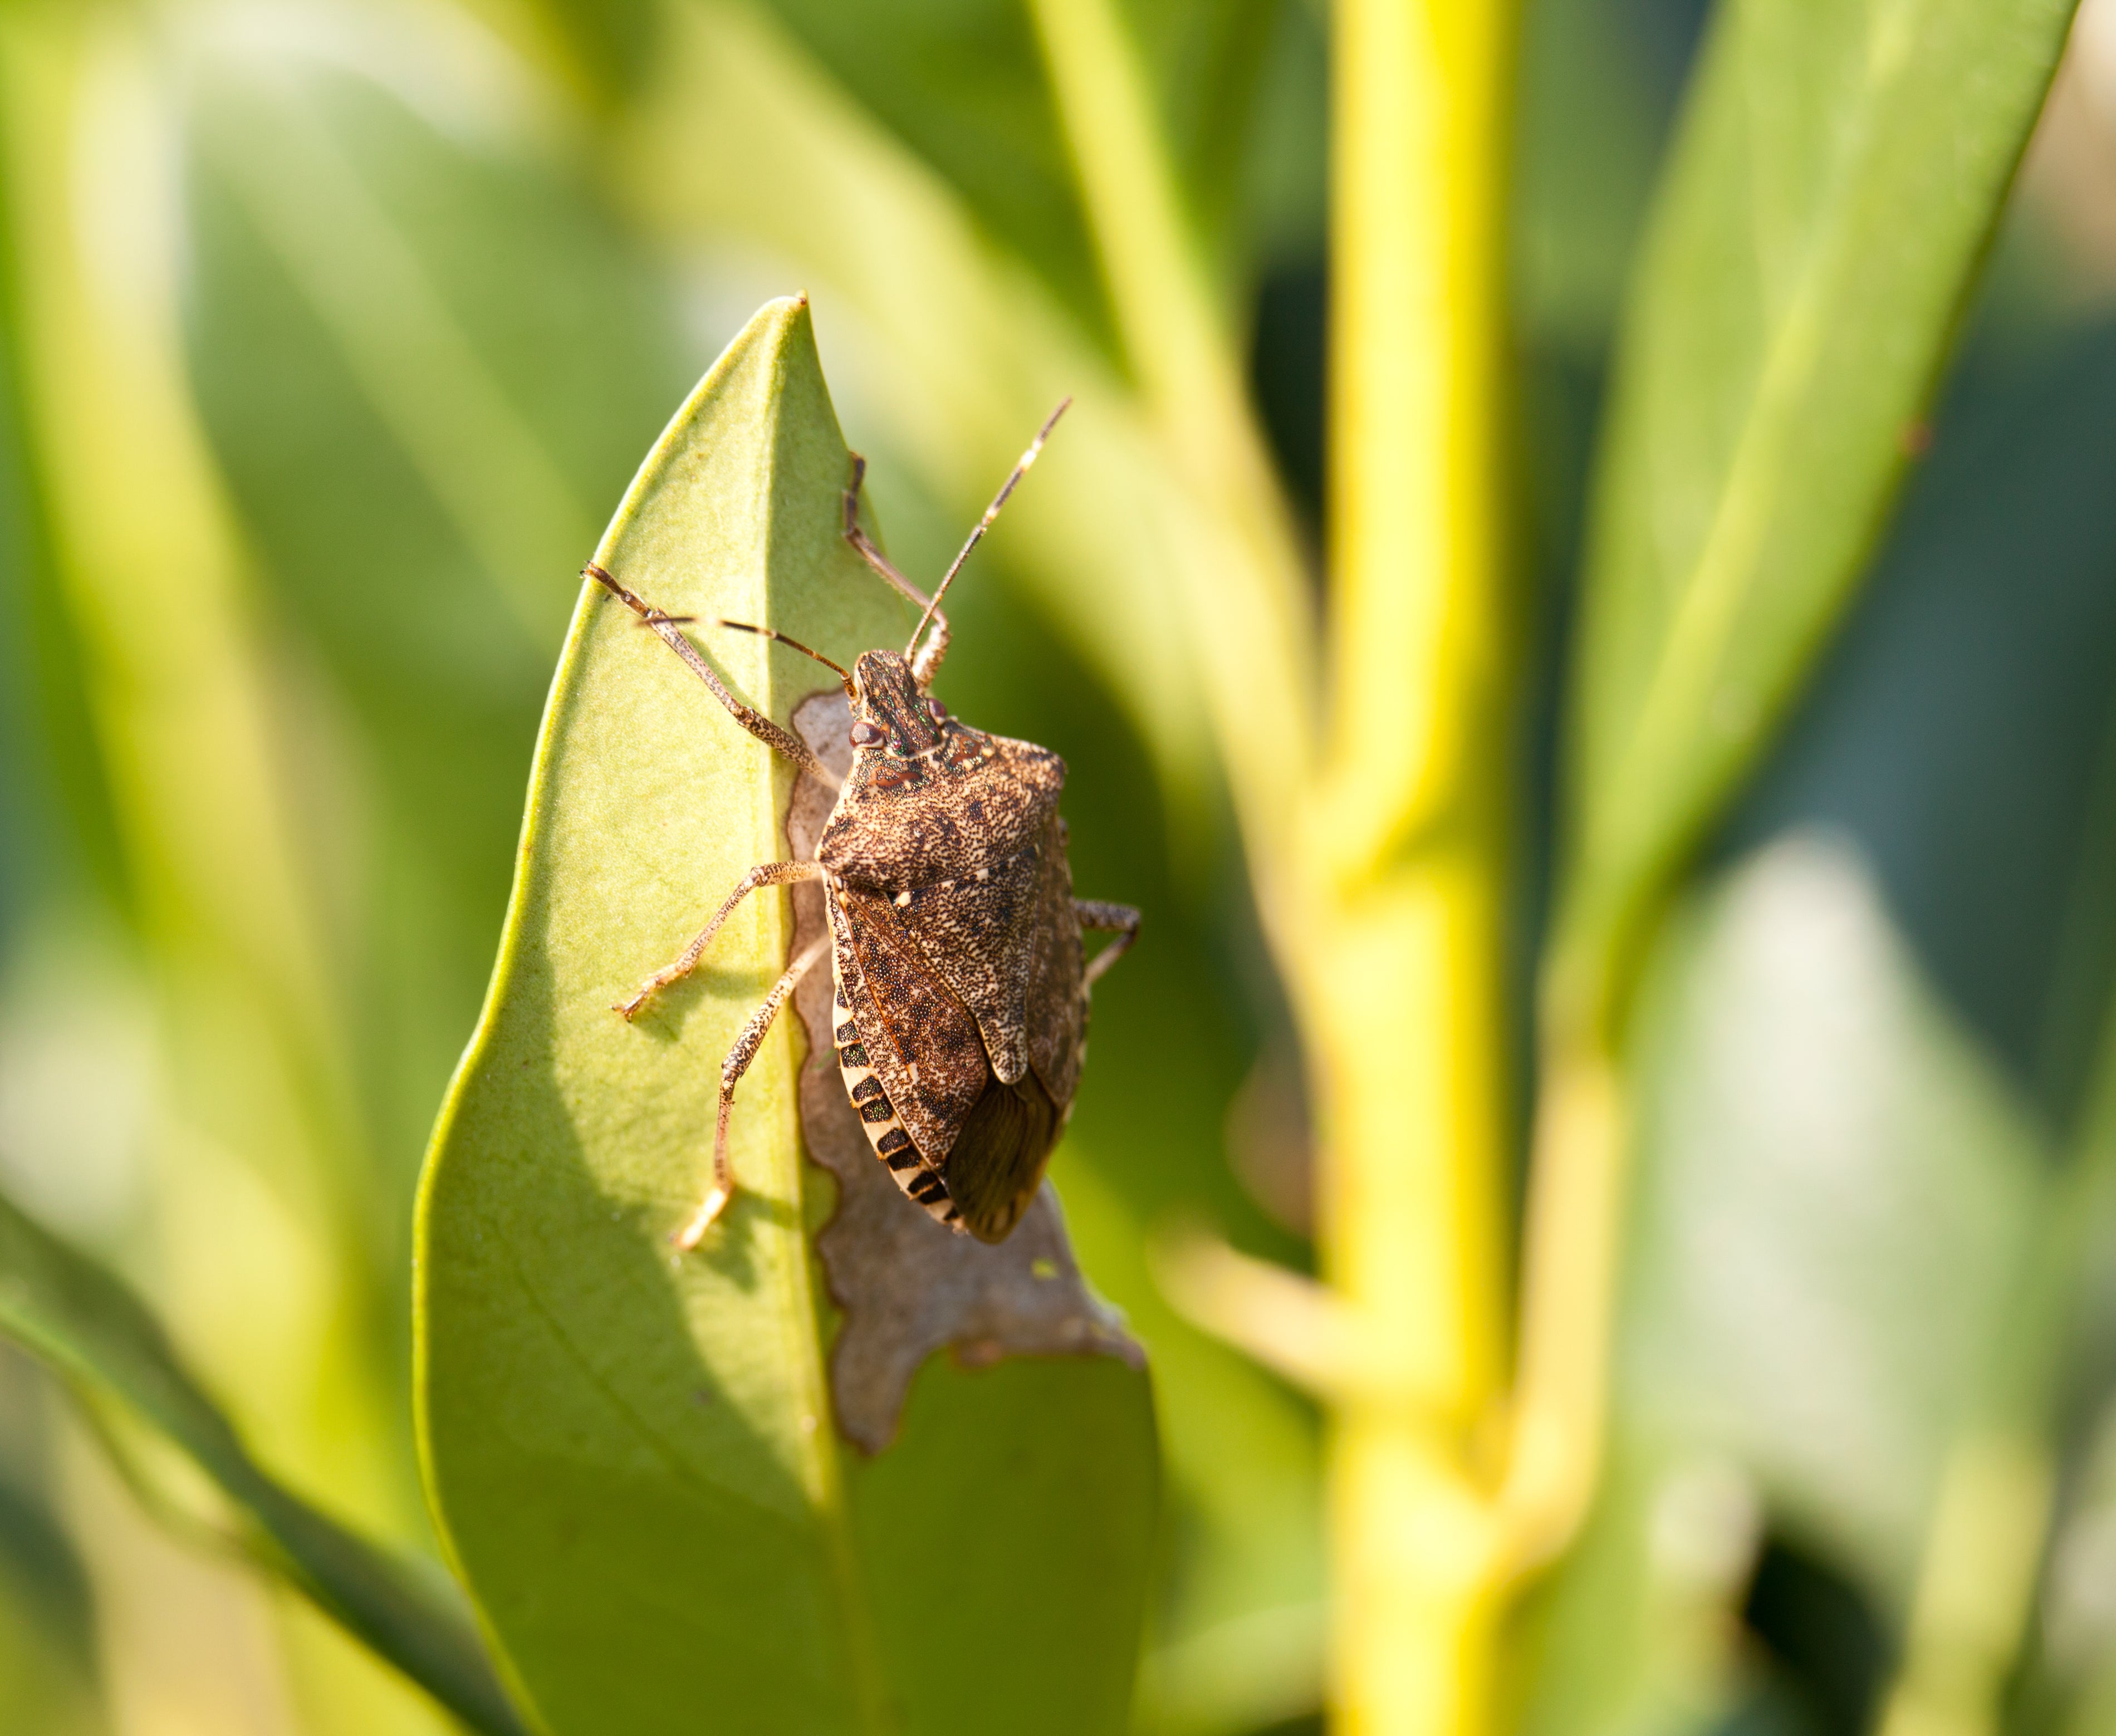 The brown marmorated stink bug’s smell has been described as like rotten fruit or cilantro